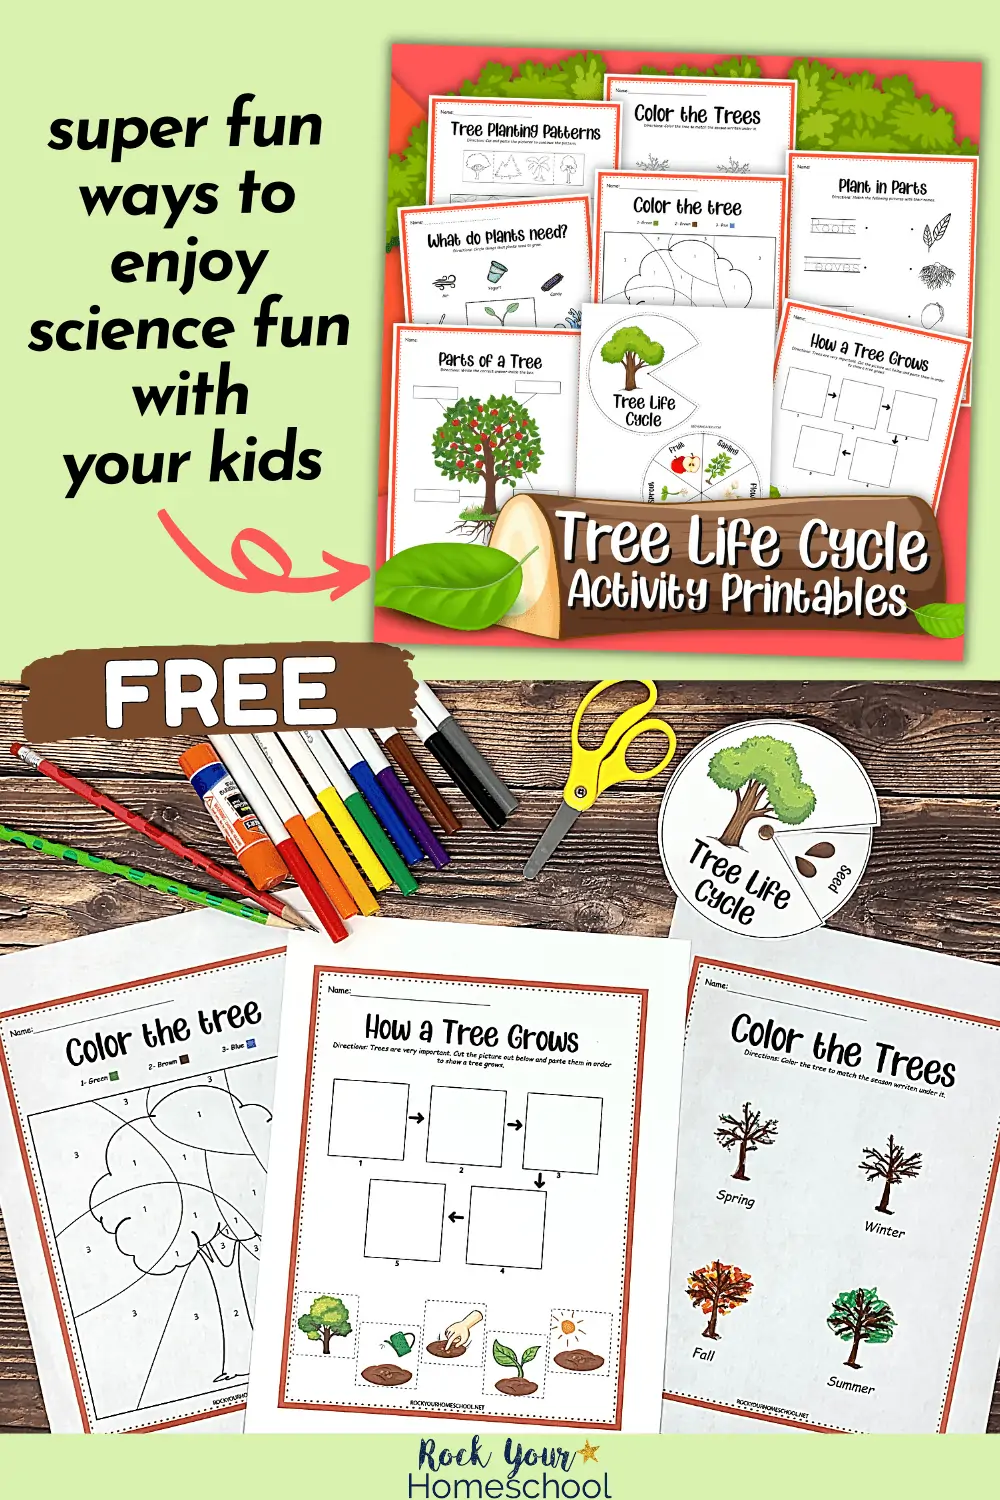 5 Amazing Ways to Learn About the Tree Life Cycle (+ Free Printables)